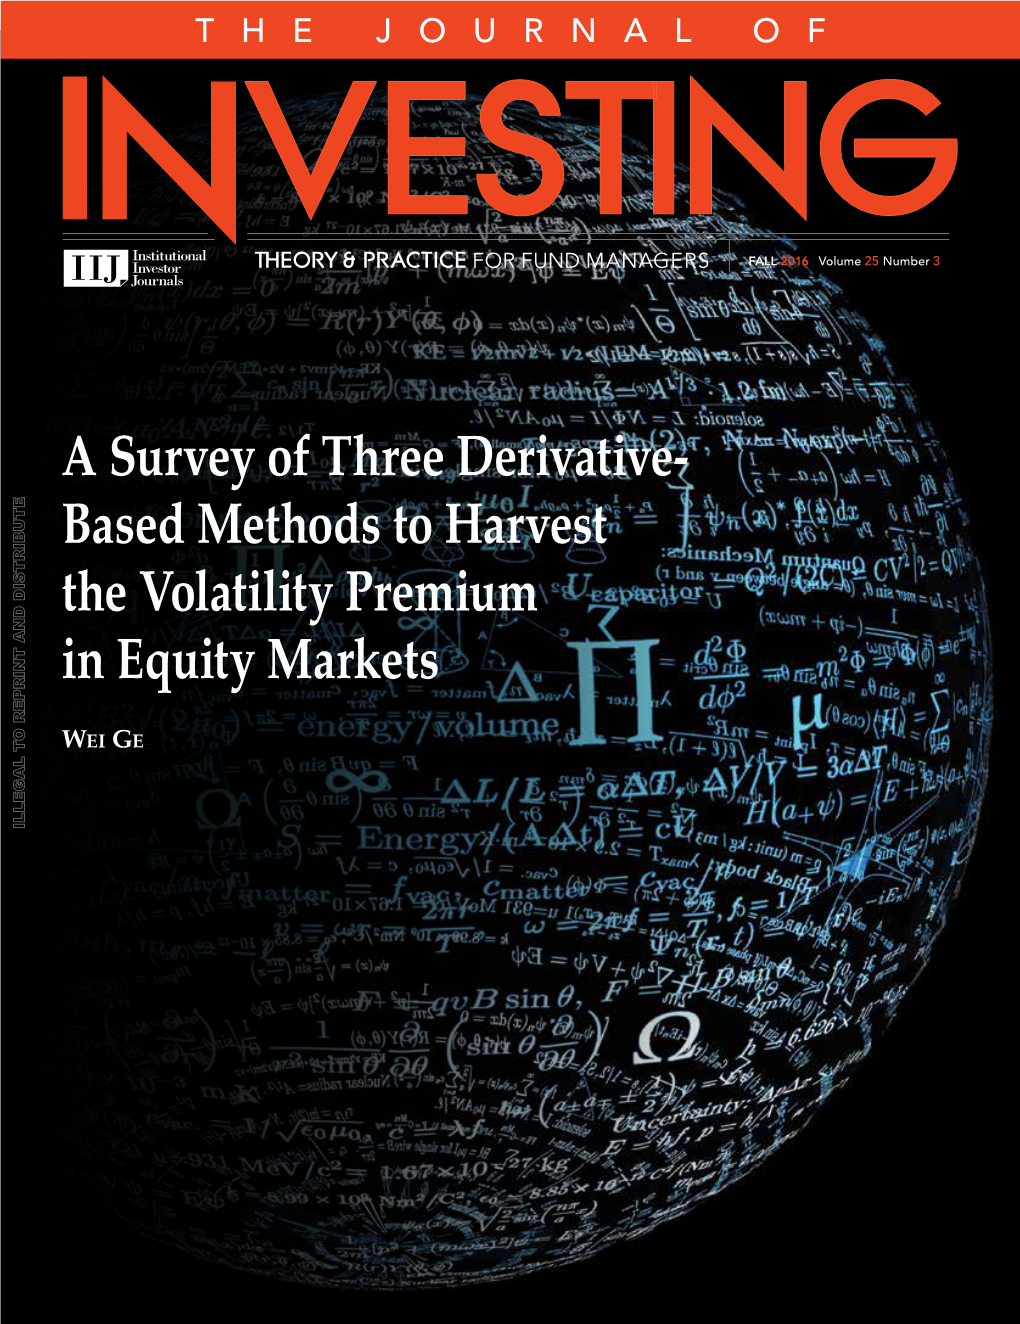 Based Methods to Harvest the Volatility Premium in Equity Markets